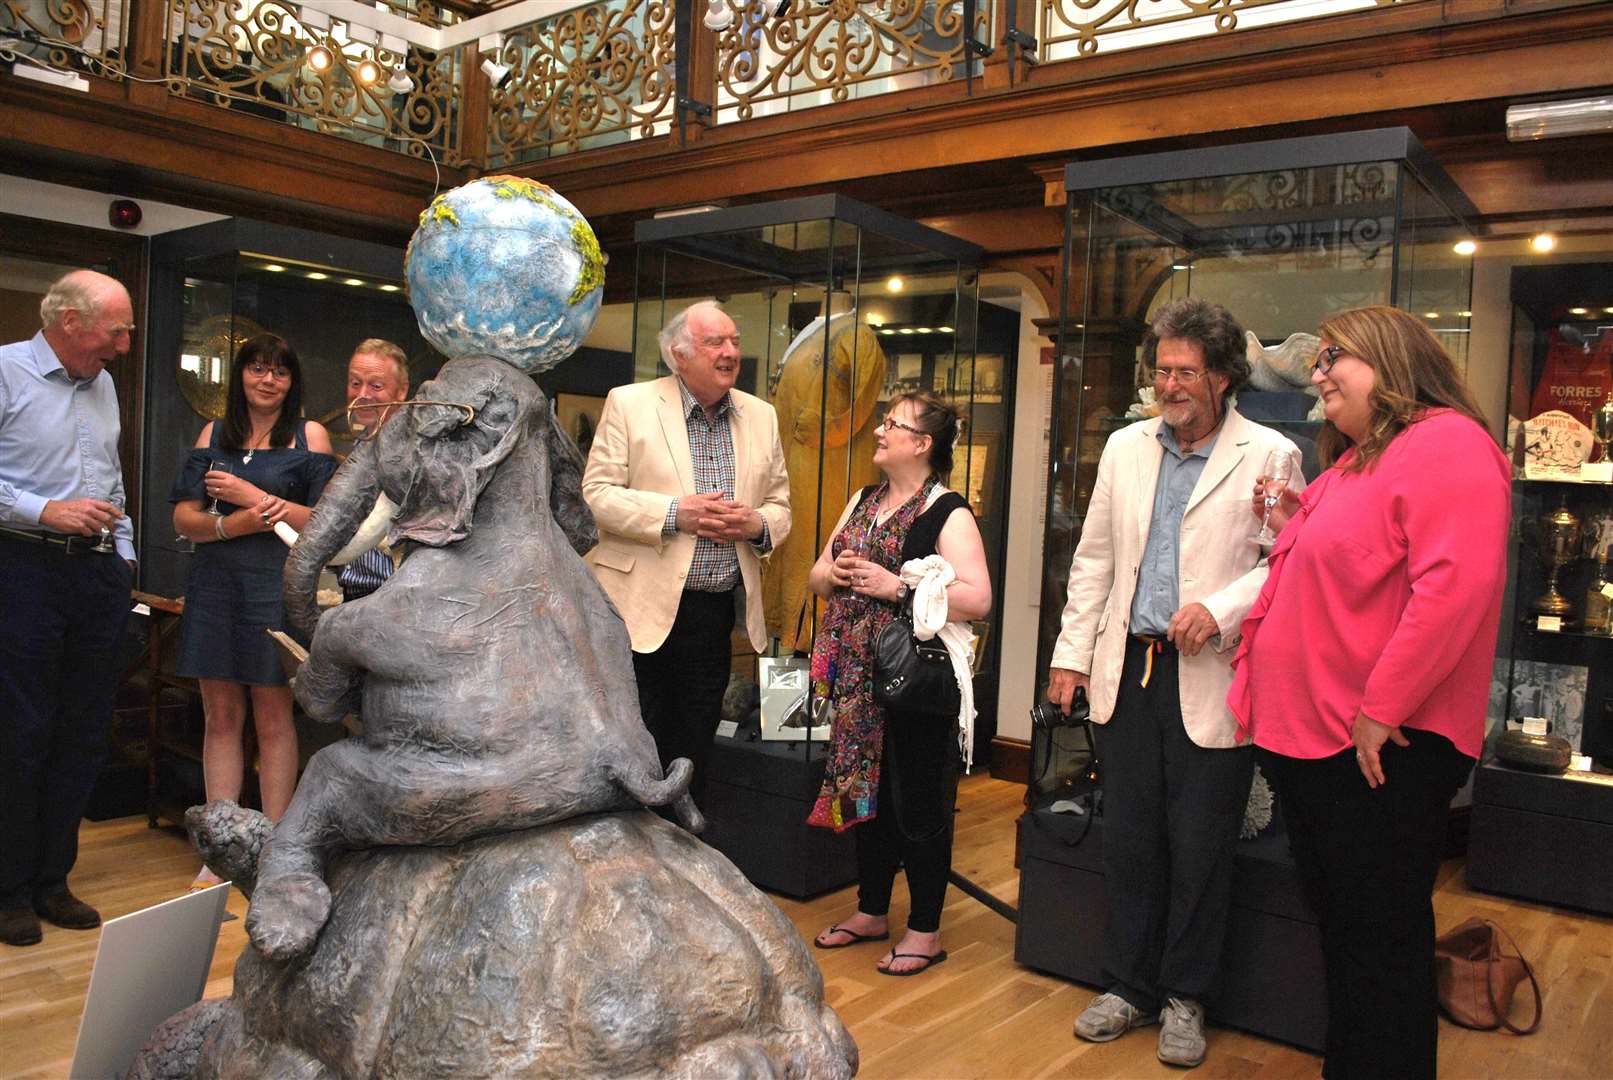 The unveiling of the Tortiphant at the Falconer Museum in 2018.